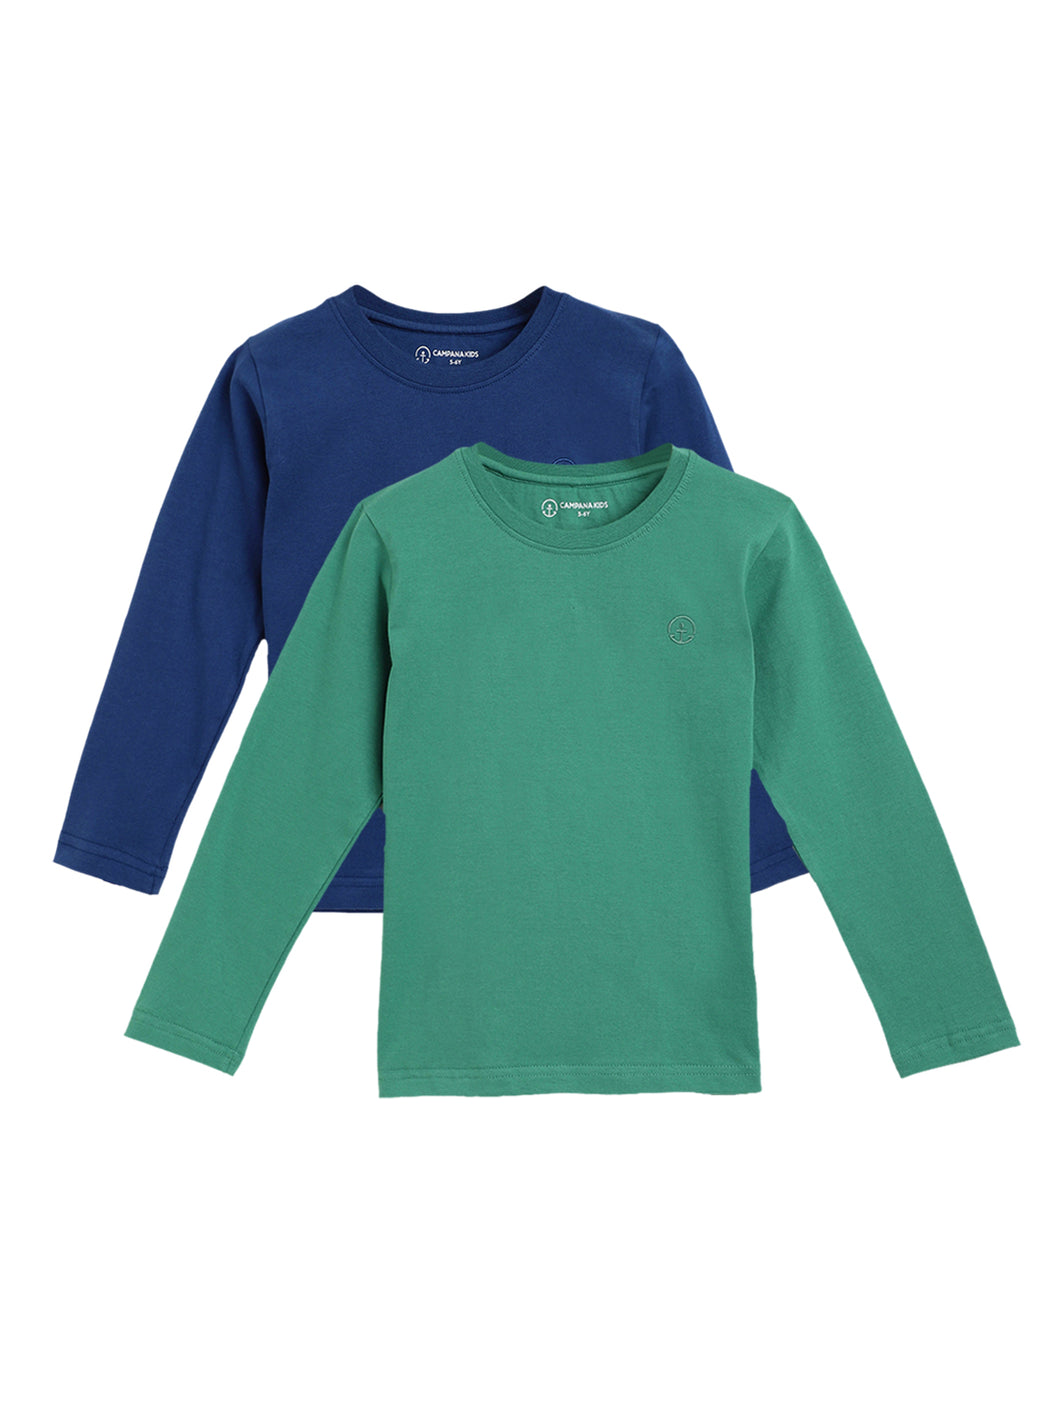 Campana Boys Luciano Full Sleeve Round Neck T-Shirt - Pack of 2 - Green & Blue